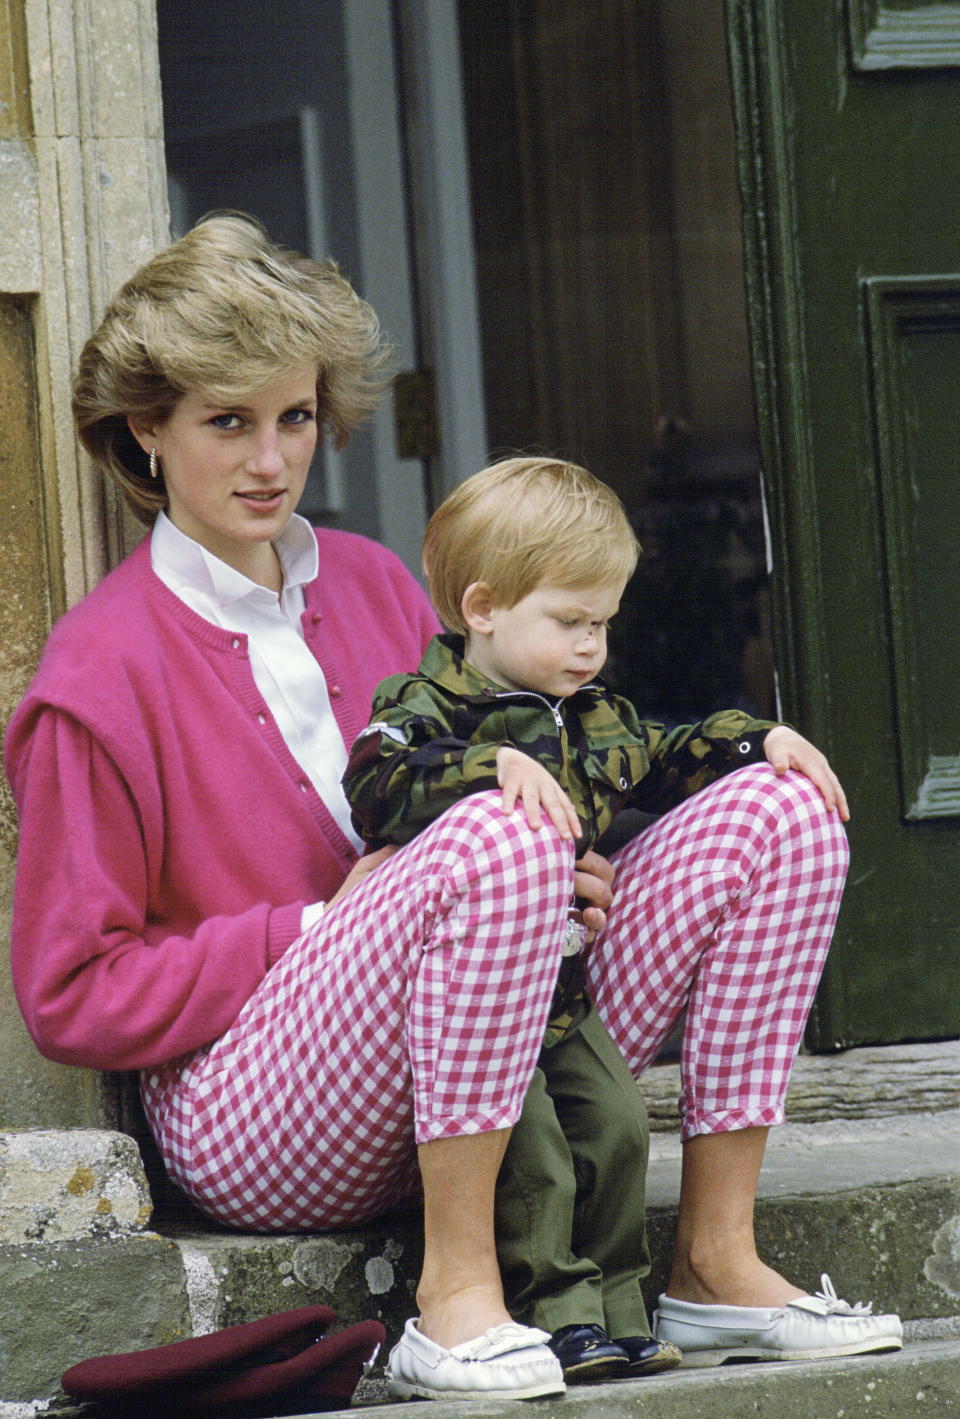 TETBURY, UNITED KINGDOM - JULY 18:  Princess Diana Sitting Outside Highgrove With Her Son Harry Who Is In Uniform As A Soldier  (Photo by Tim Graham Photo Library via Getty Images)